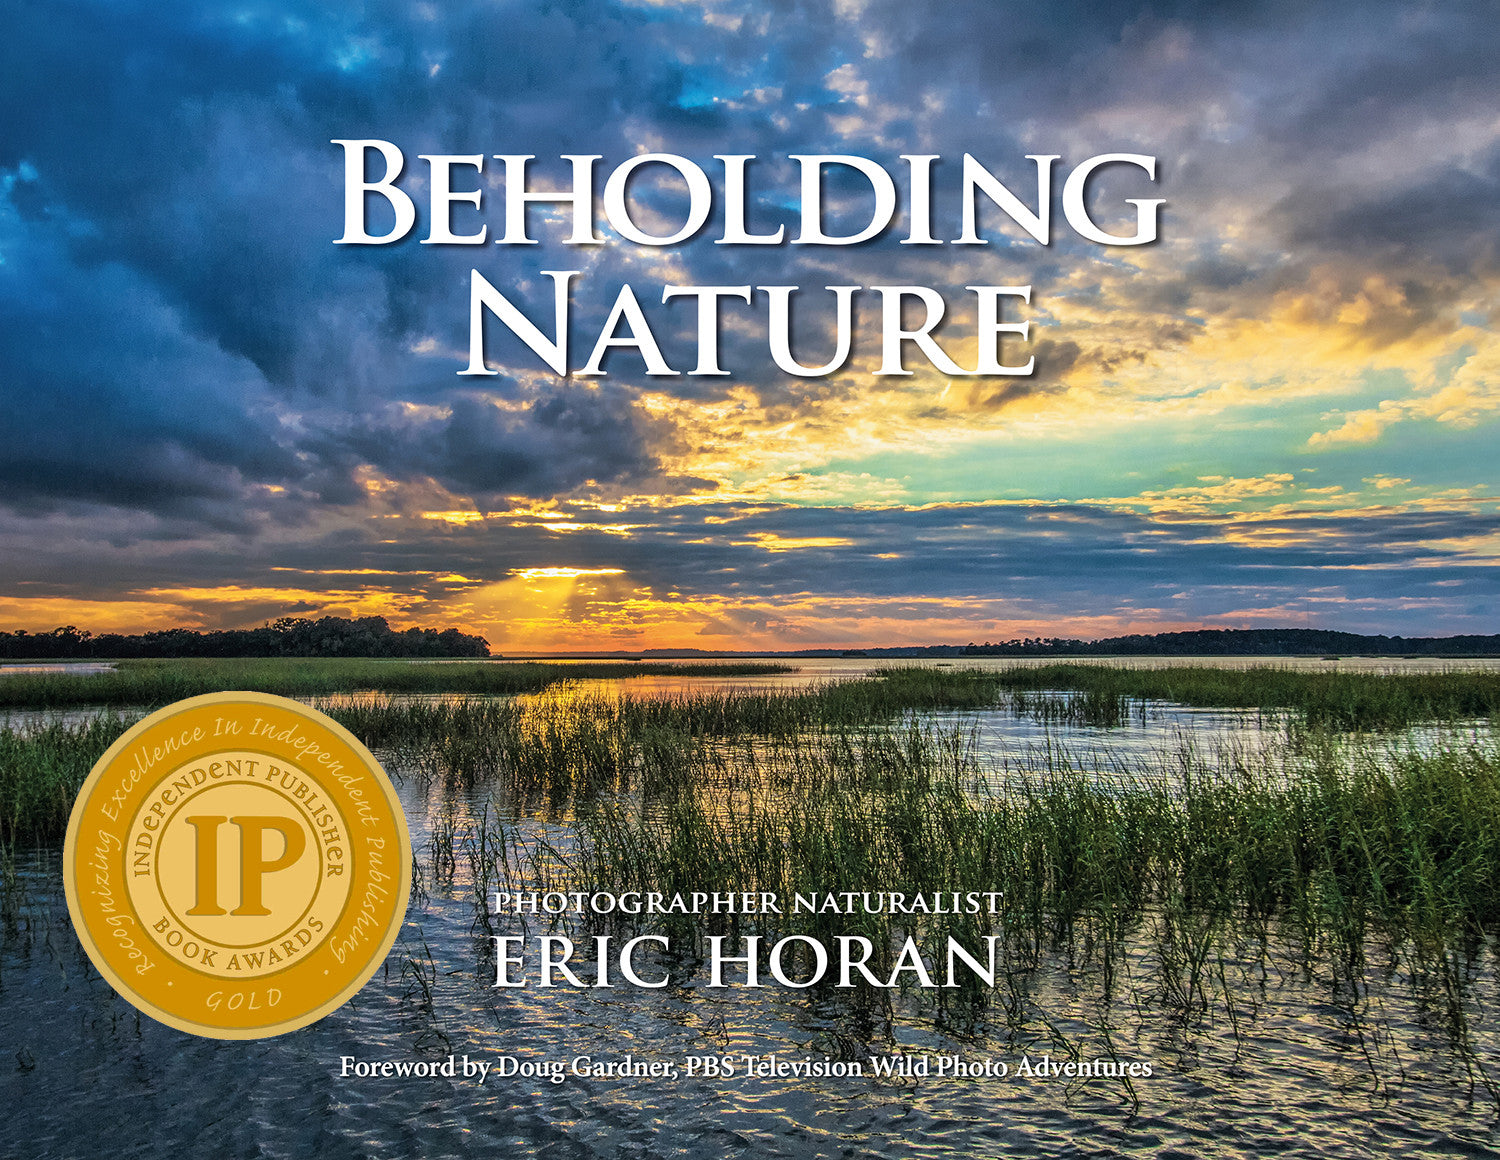 Award winning Beholding Nature Photography book by Eric Horan and Starbooks